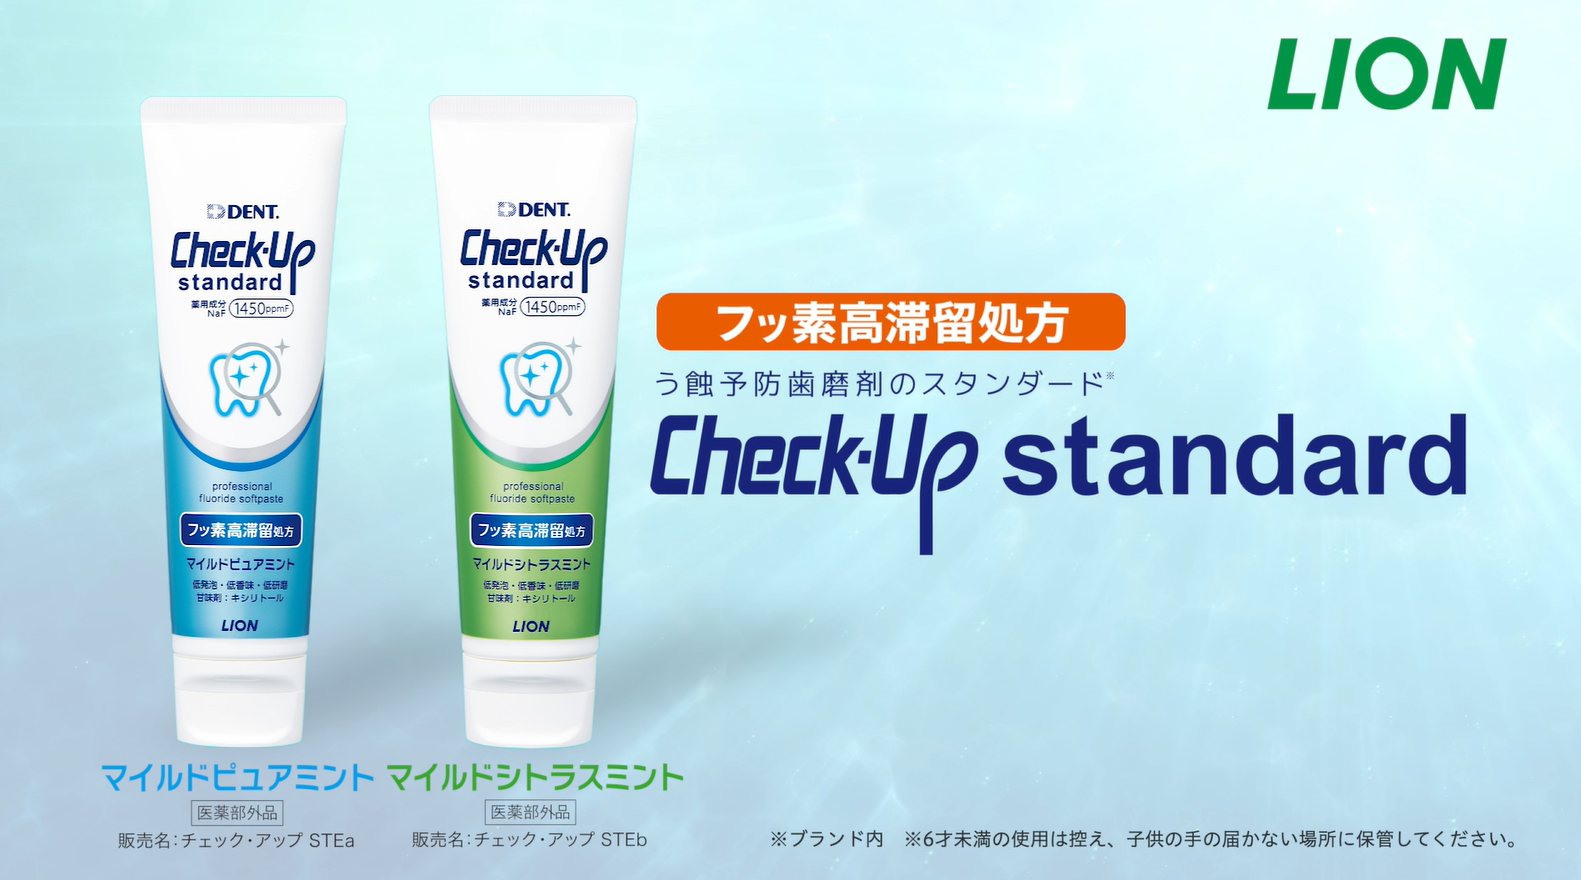 Check-Up standard